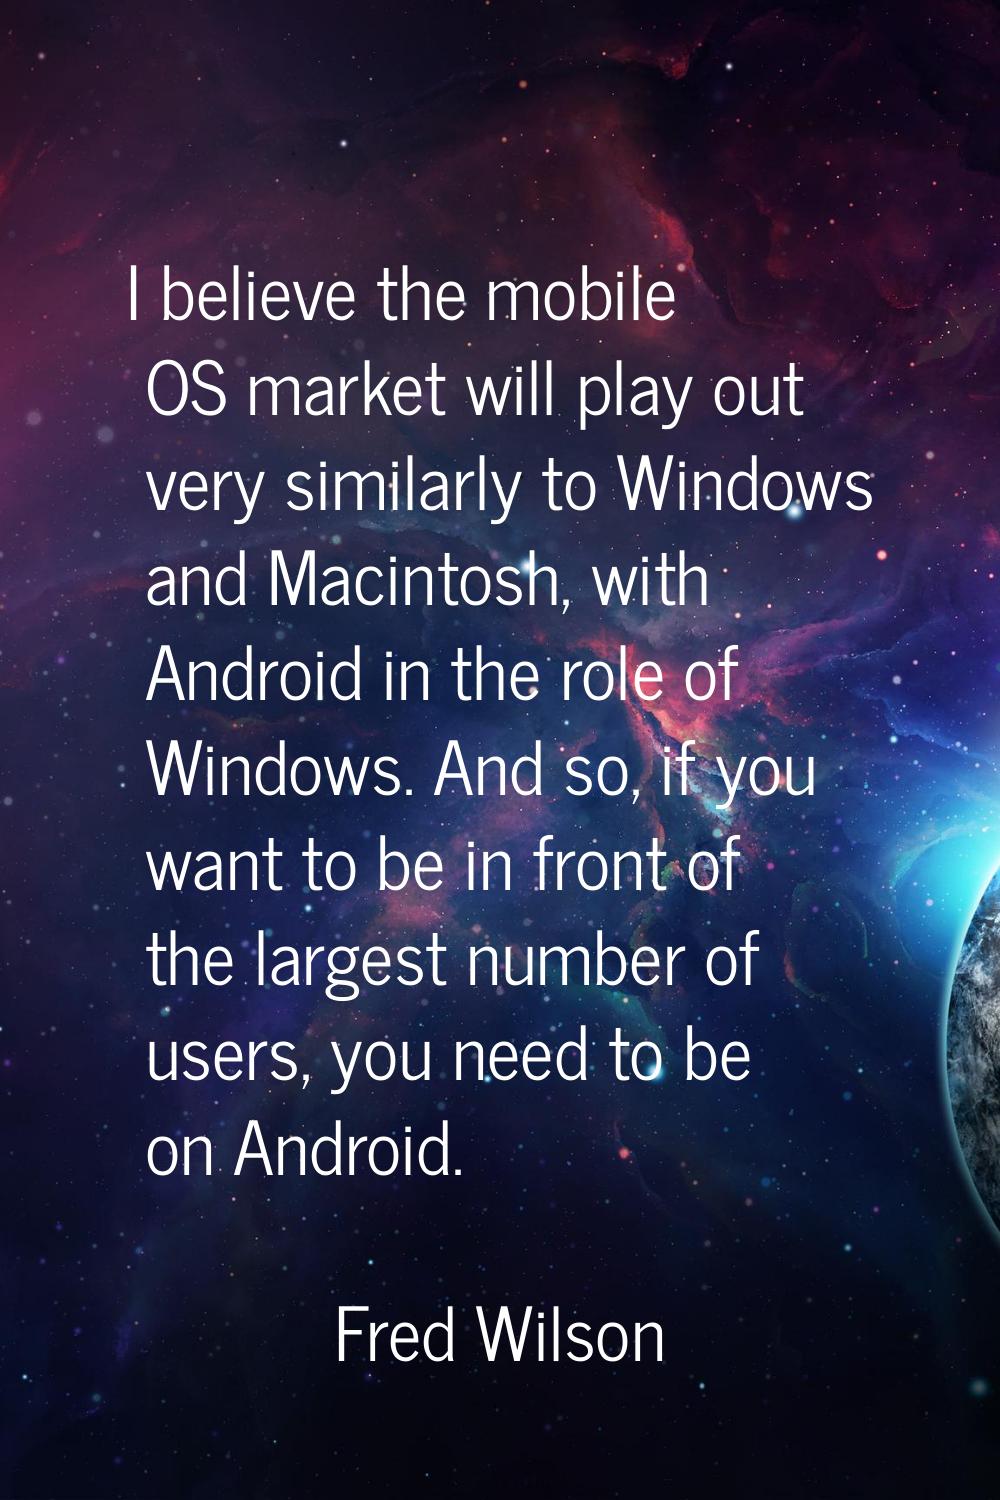 I believe the mobile OS market will play out very similarly to Windows and Macintosh, with Android 